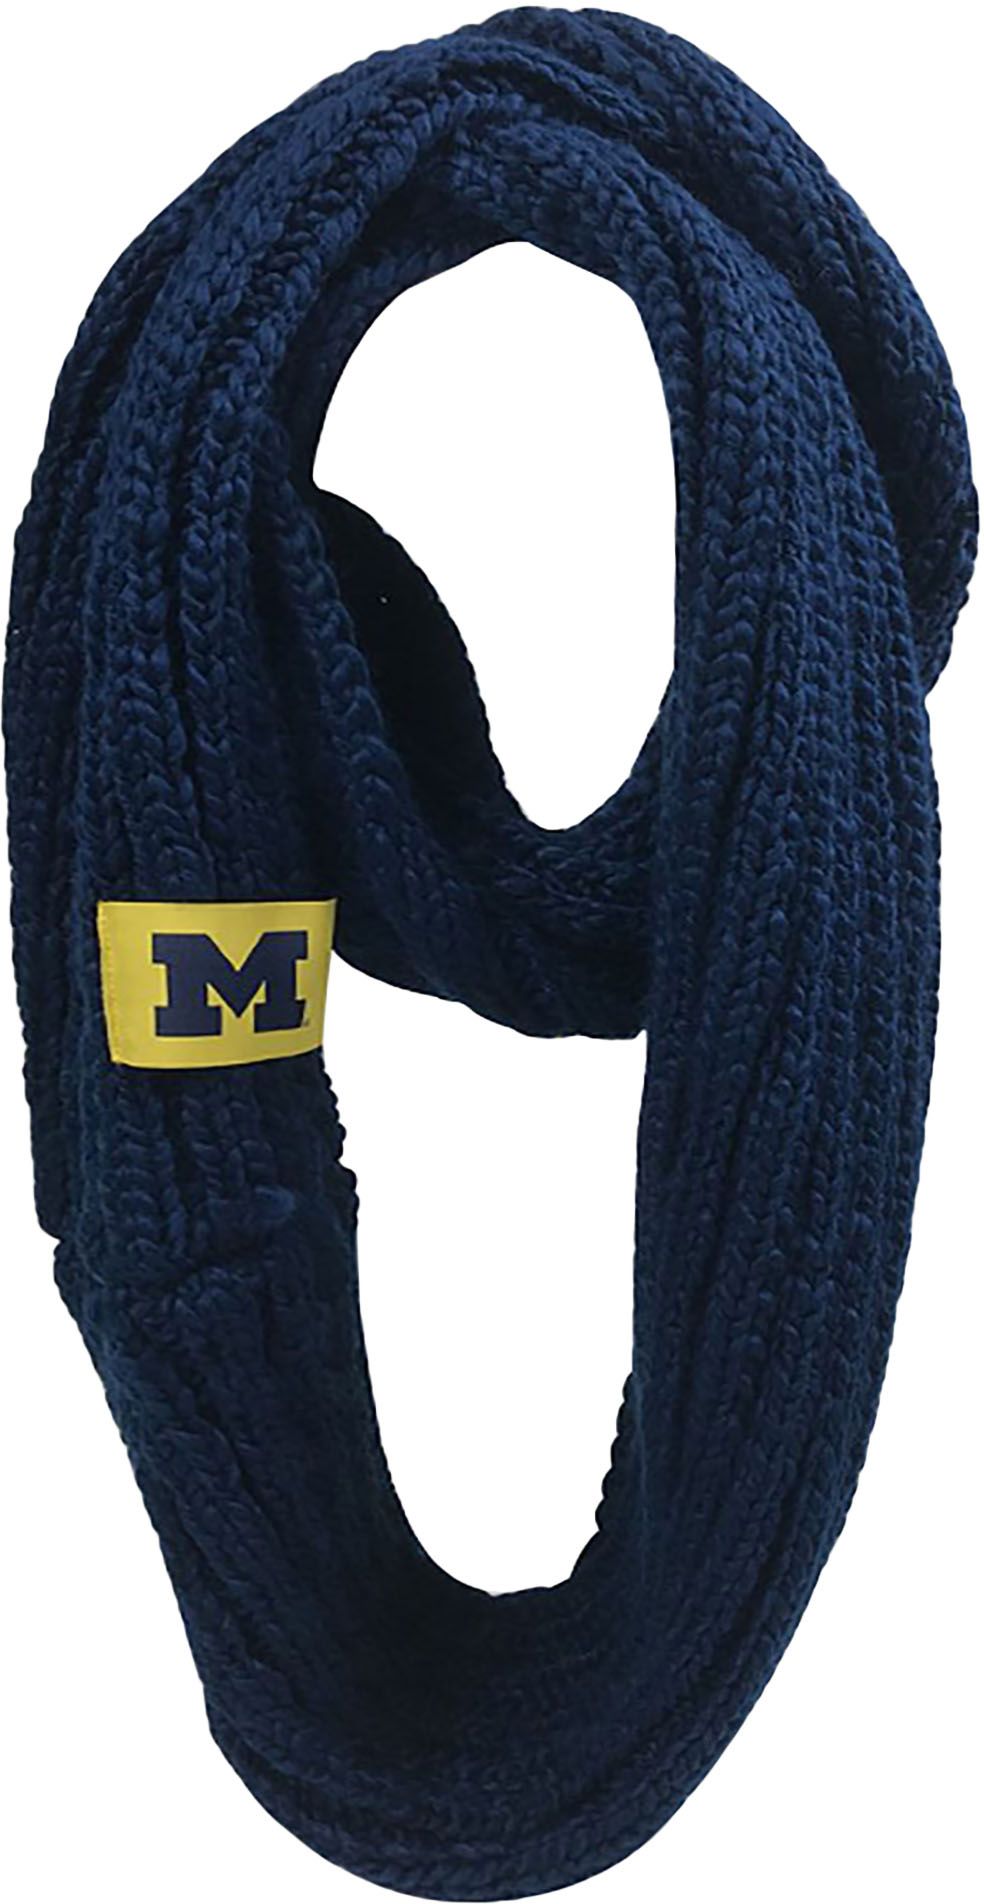 FOCO Michigan Wolverines Cable Knit Infinity Scarf